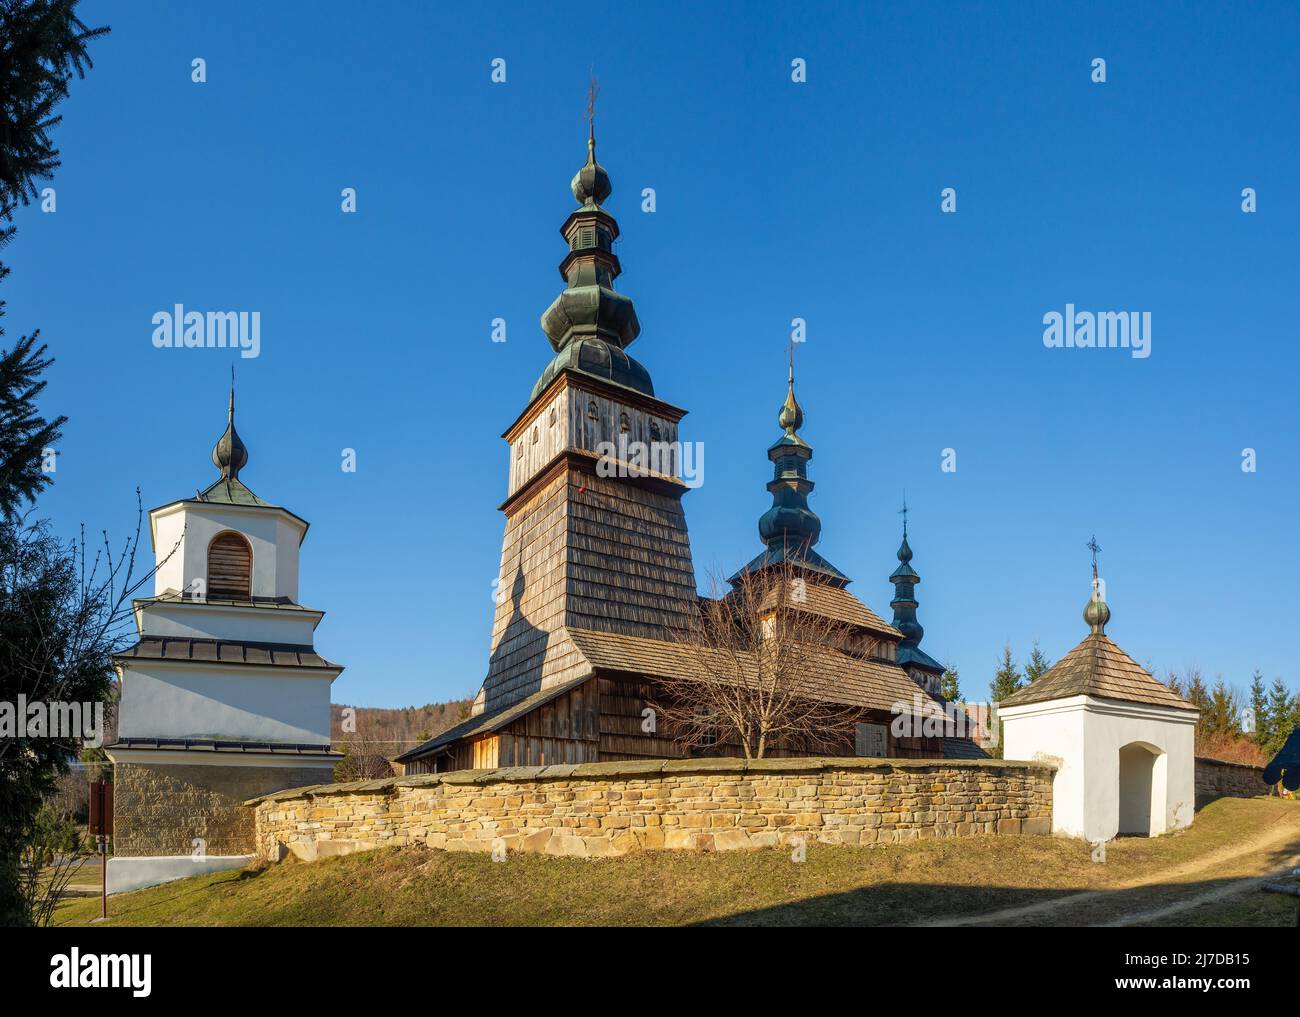 Old orthodox church in Owczary, Poland. Built in 17th century. Now used both as a Roman Catholic and Greek Catholic Church. UNESCO World Heritage Site Stock Photo